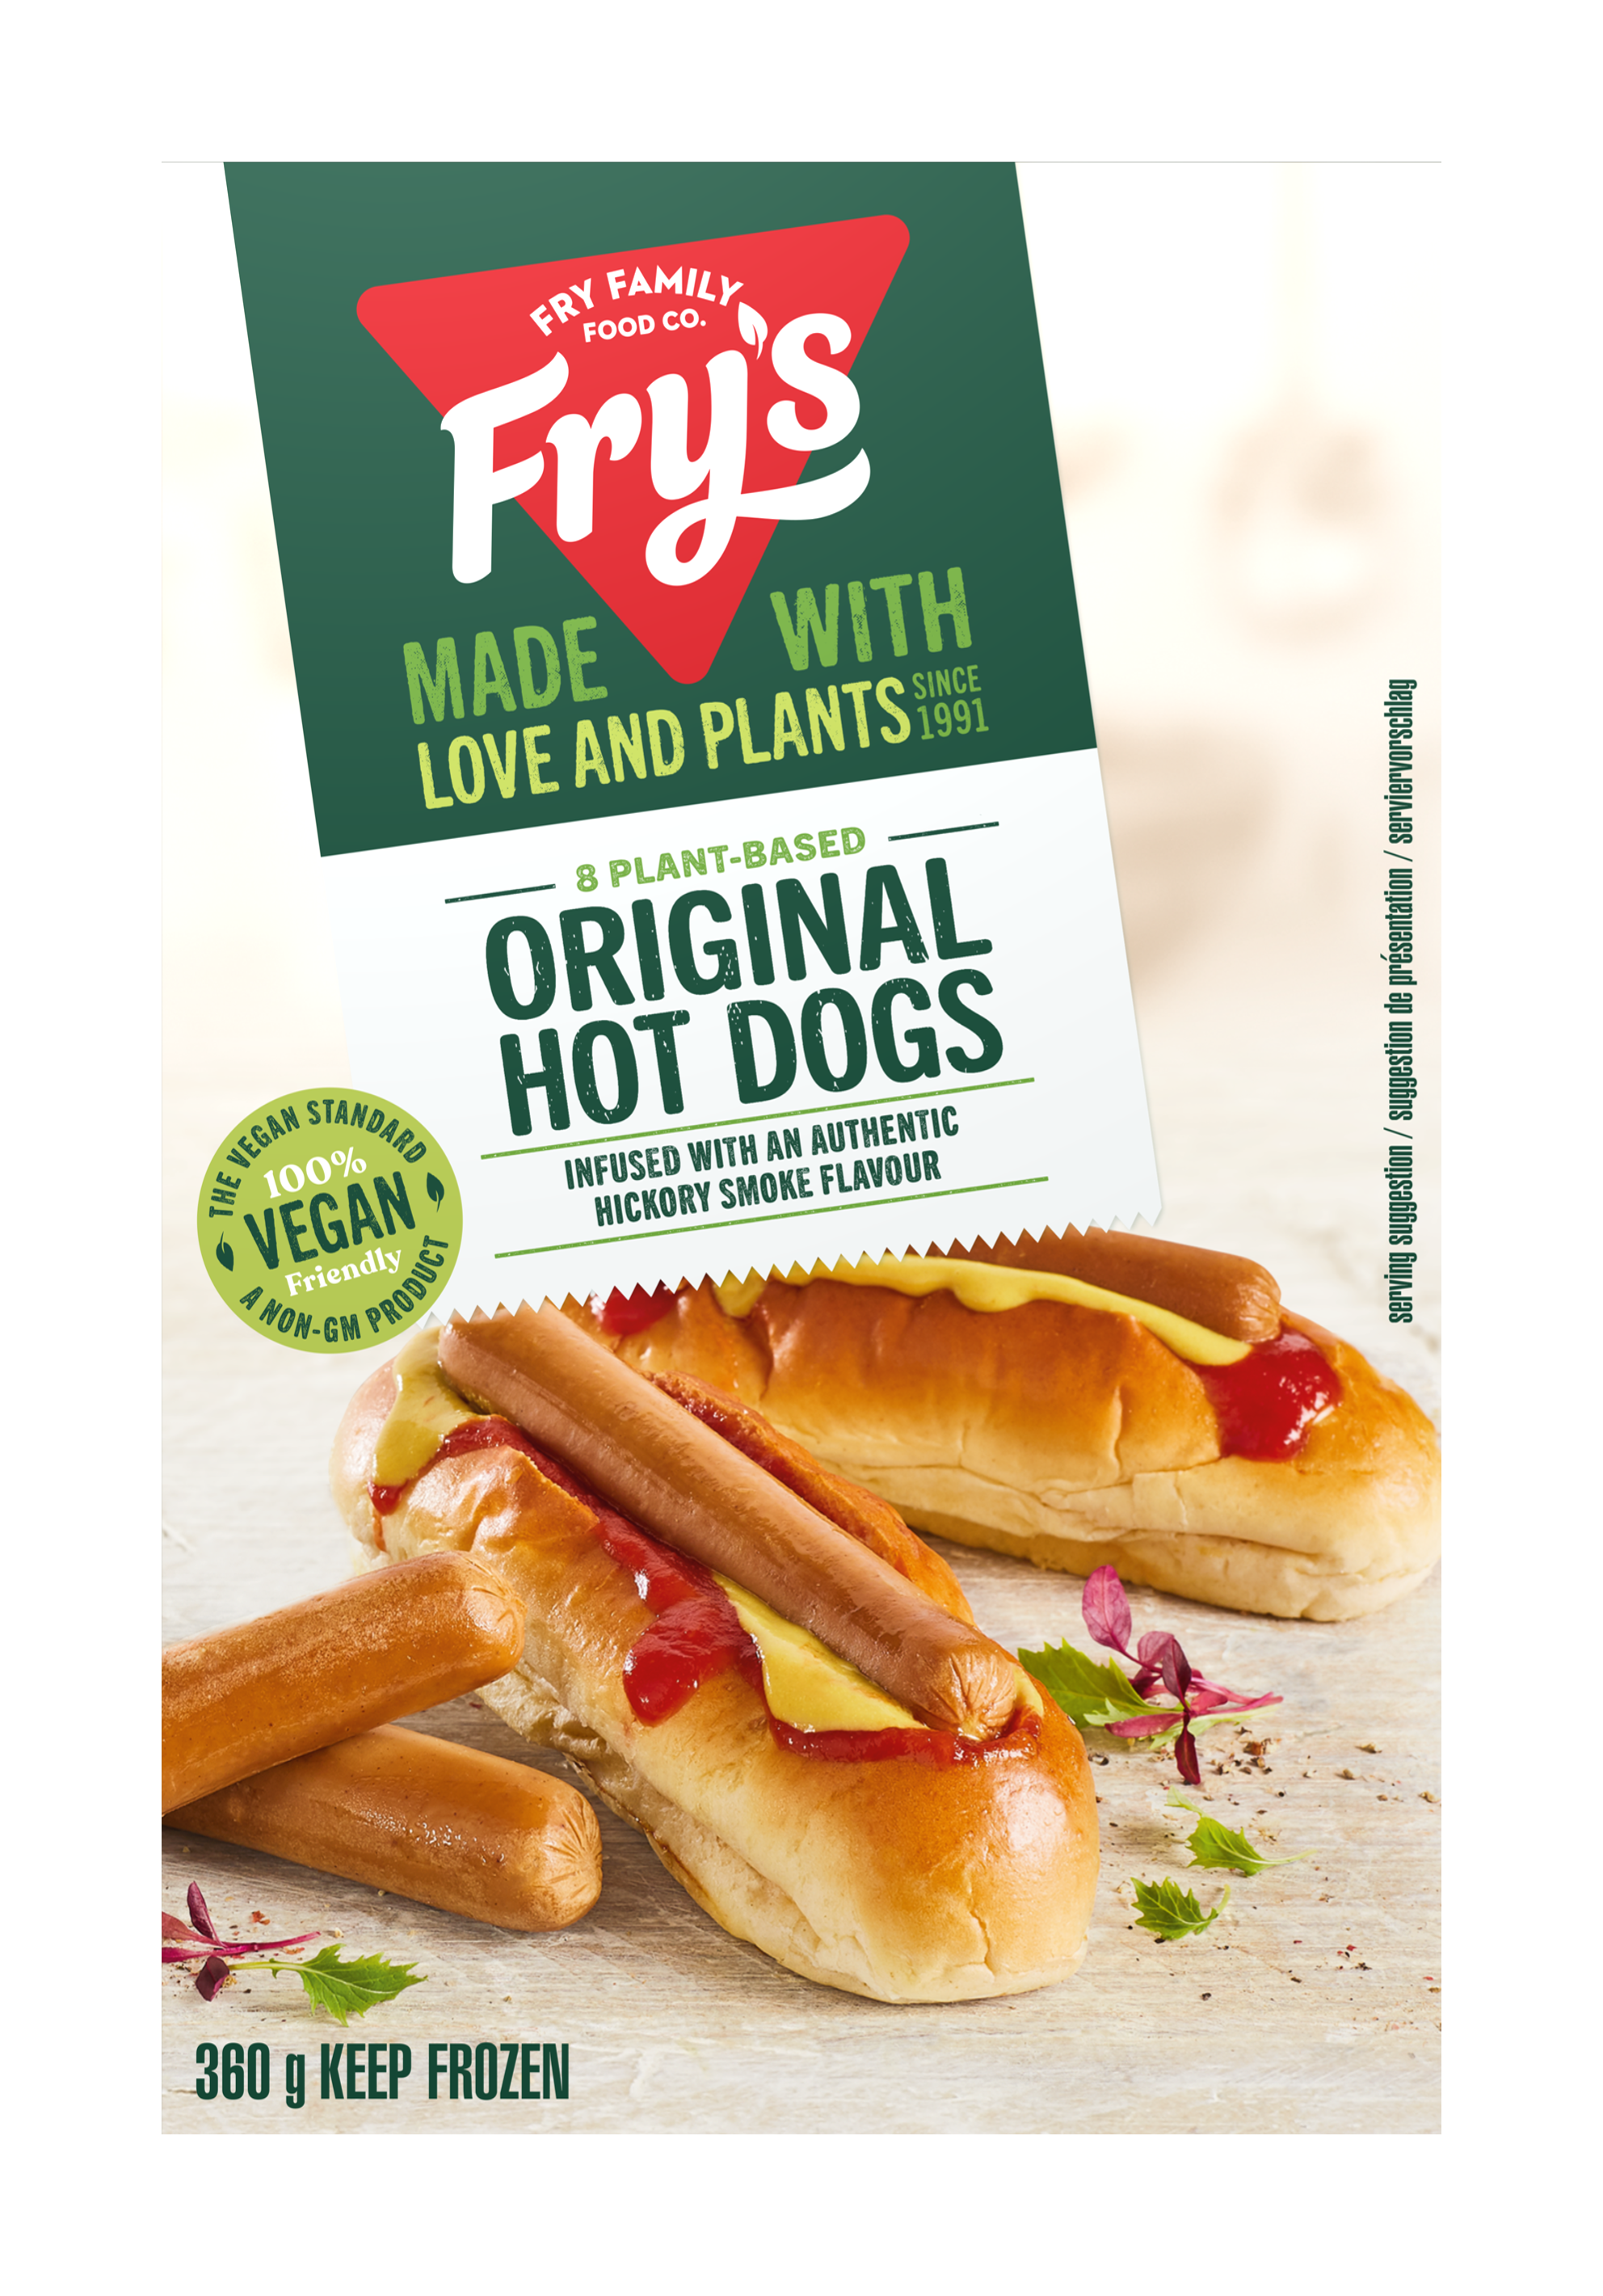 https://fryfamilyfood.com/za/wp-content/uploads/sites/2/2019/03/Hot-Dogs-3D-Front-Facing.png